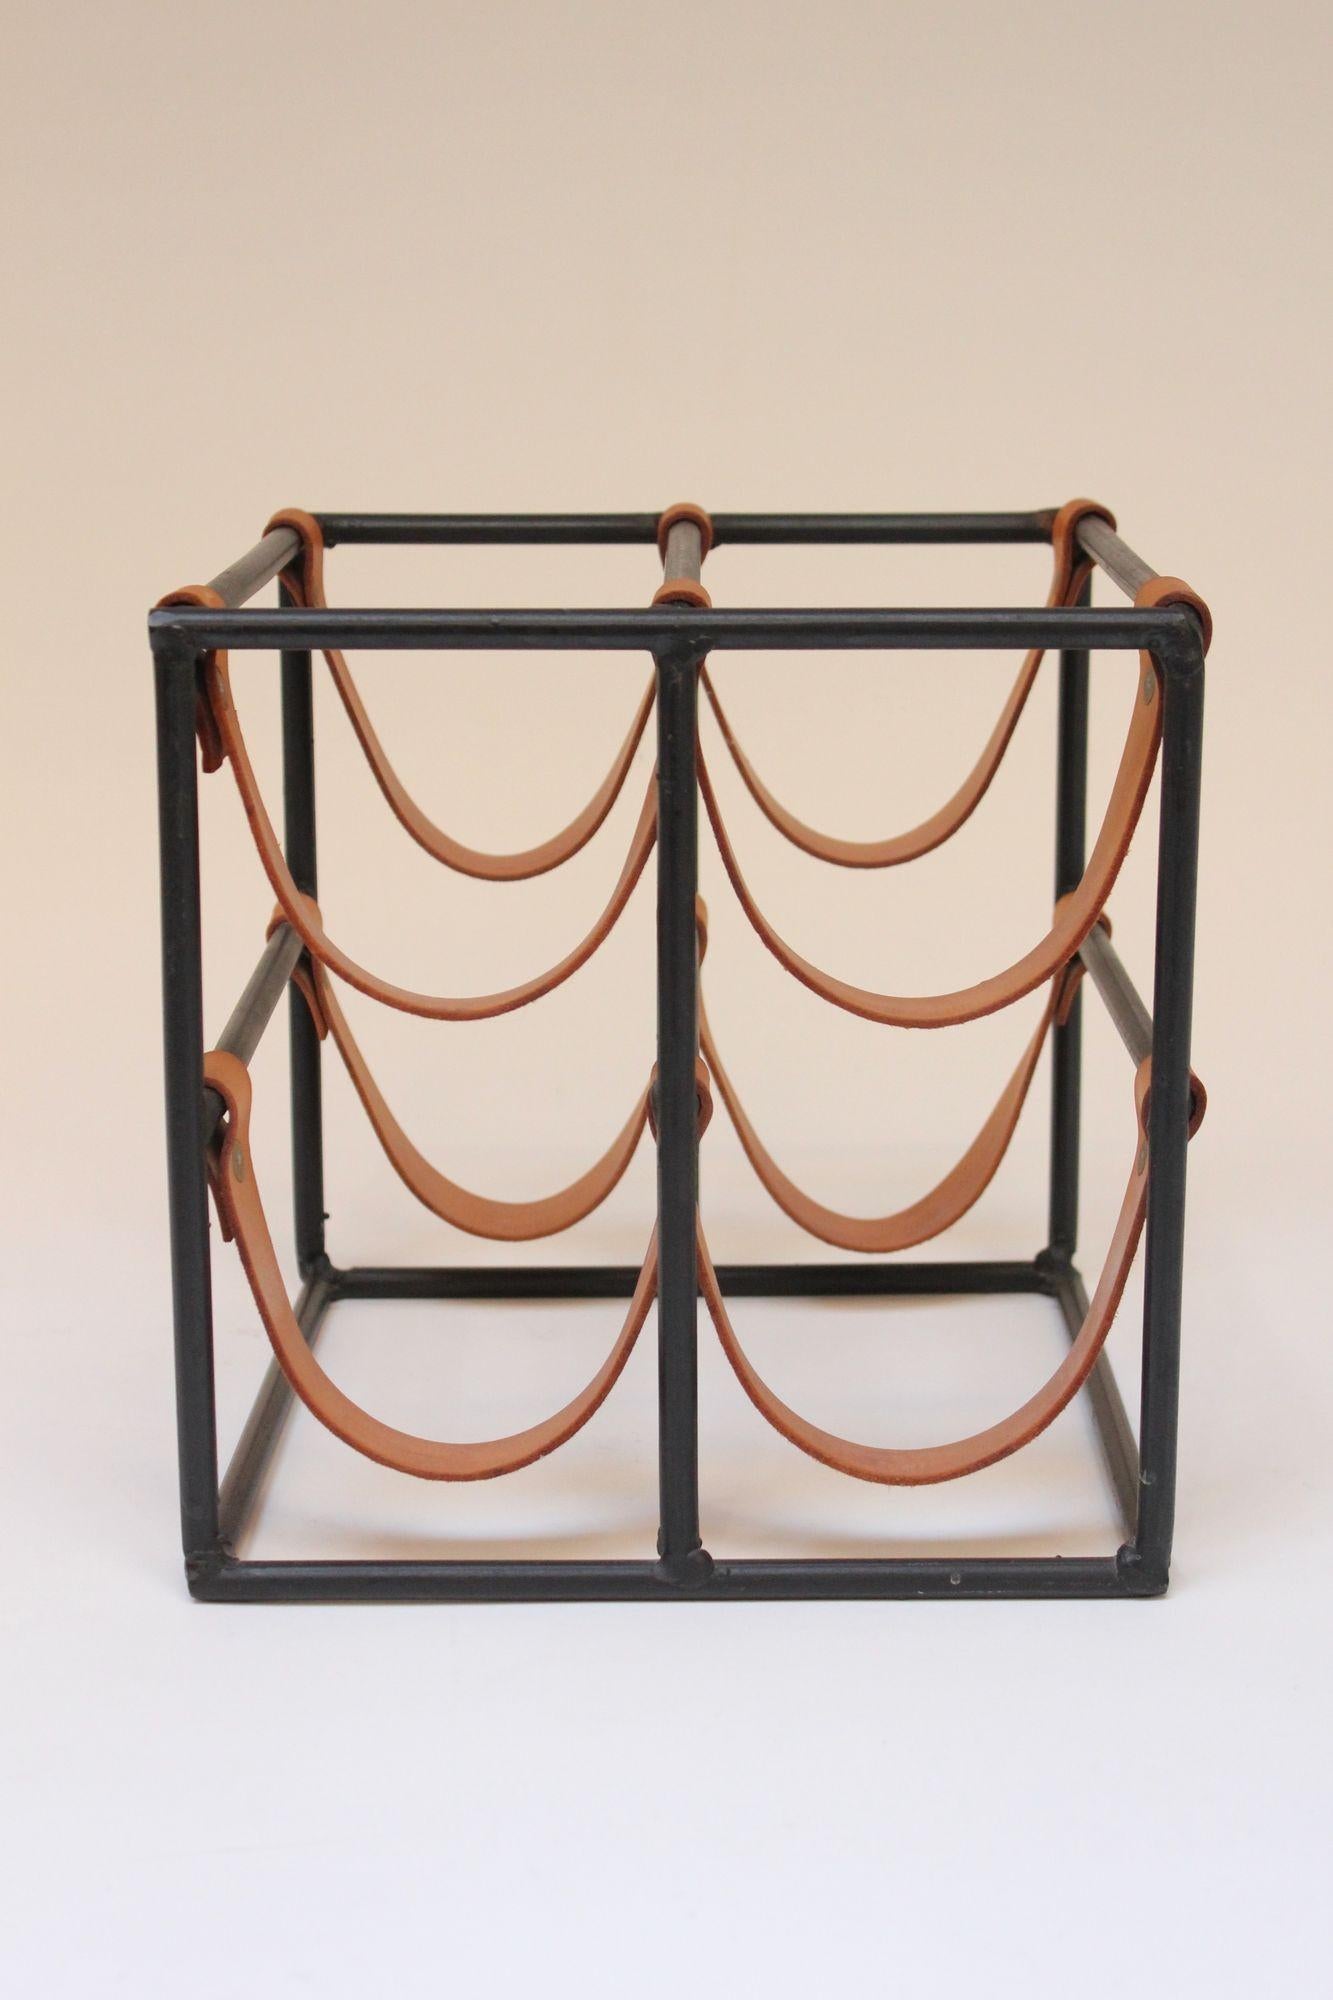 Mid-Century American Modern wine rack by Arthur Umanoff for Shaver Howard composed of eight saddle-leather strap holders and wrought iron frame. All original condition, appearing to be barely used, as leather is in excellent, vintage